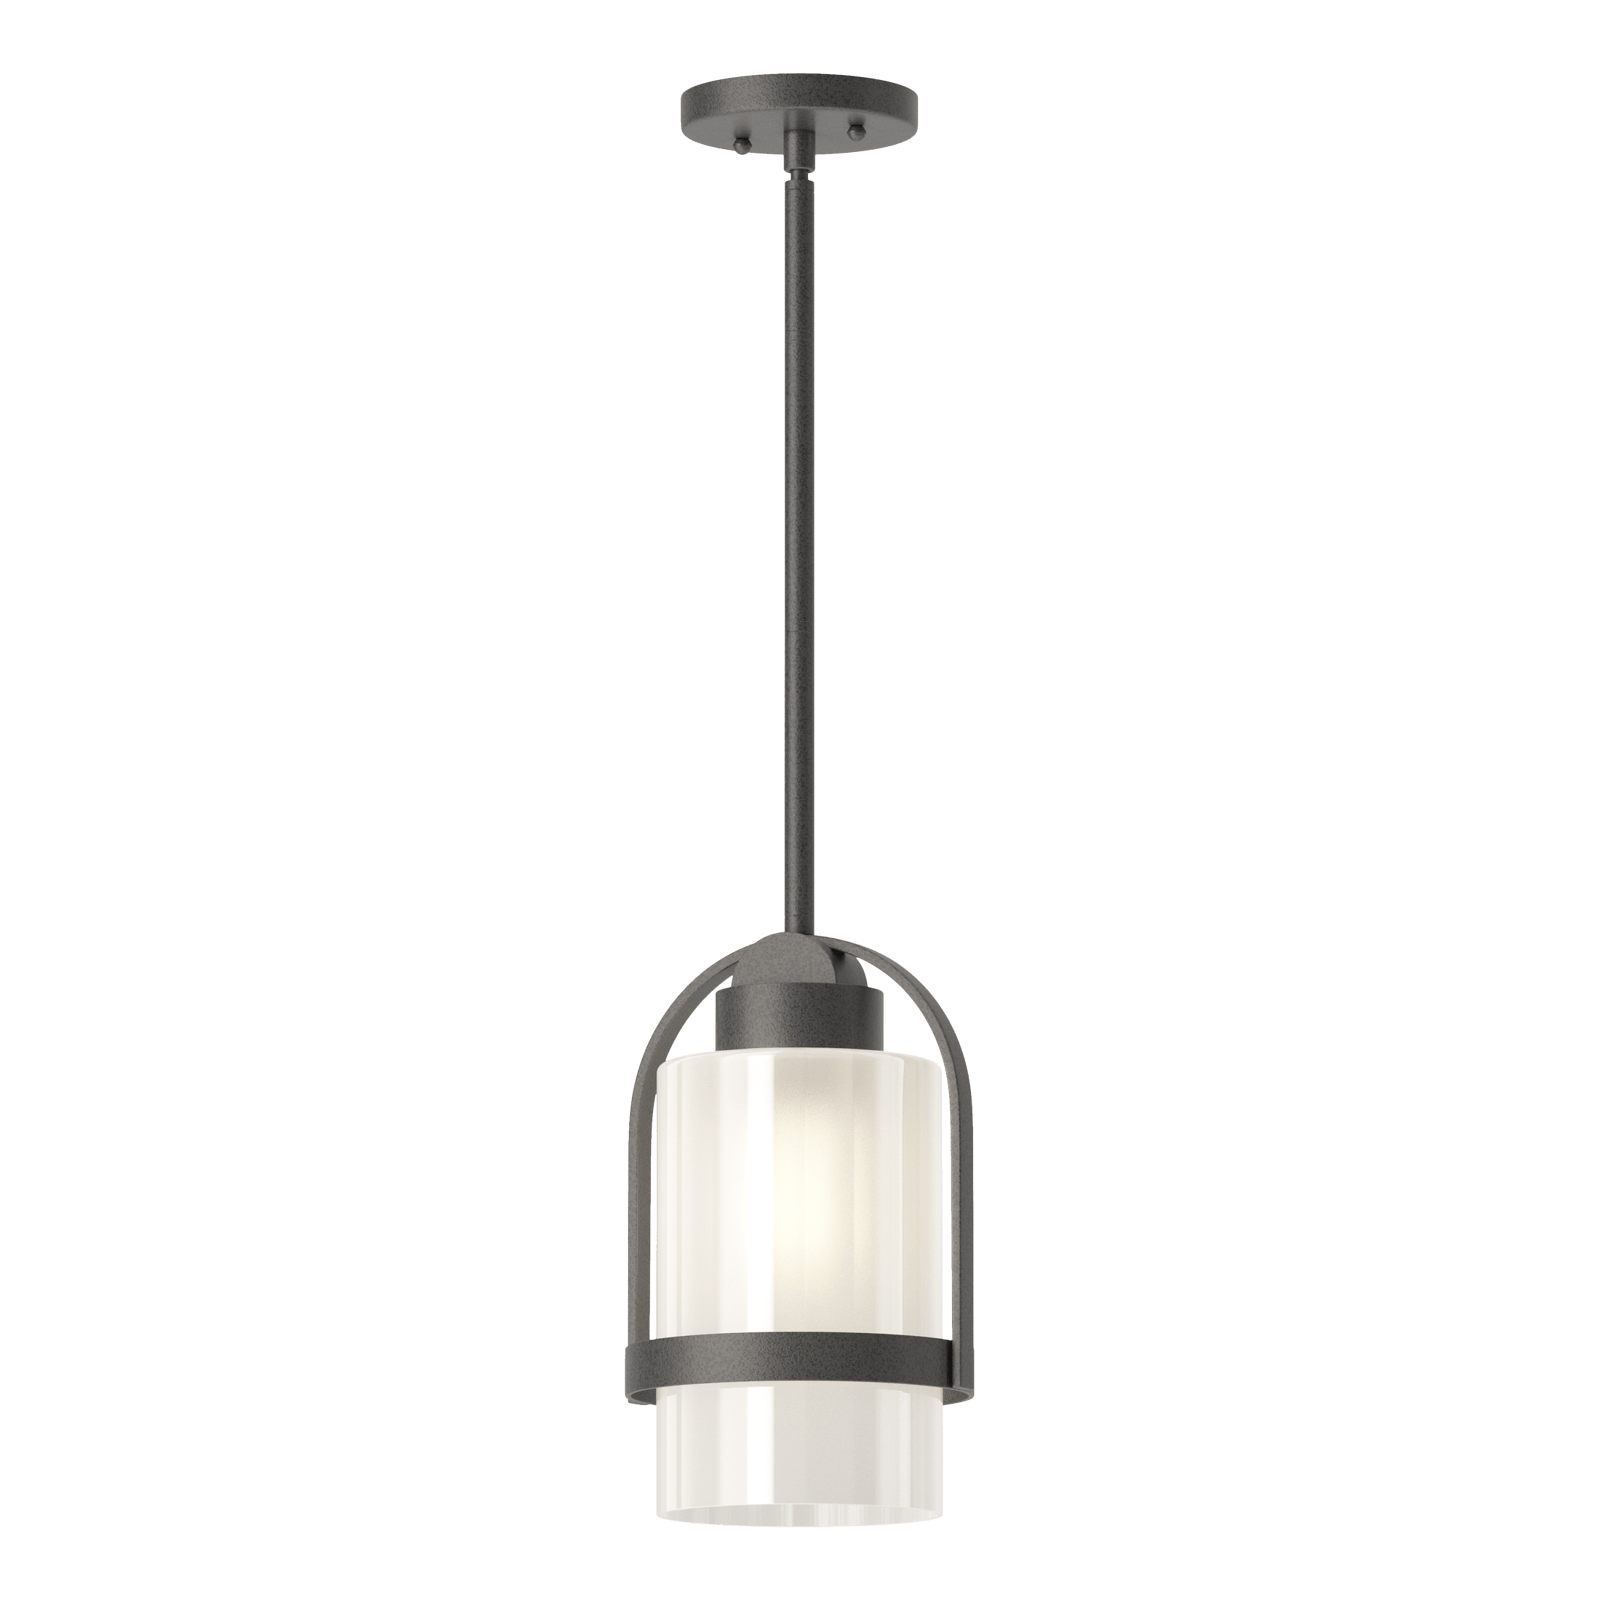 Hubbardton Forge Alcove Outdoor Pendant Outdoor Light Fixture l Hanging Hubbardton Forge Coastal Natural Iron Frosted Glass (FD) 